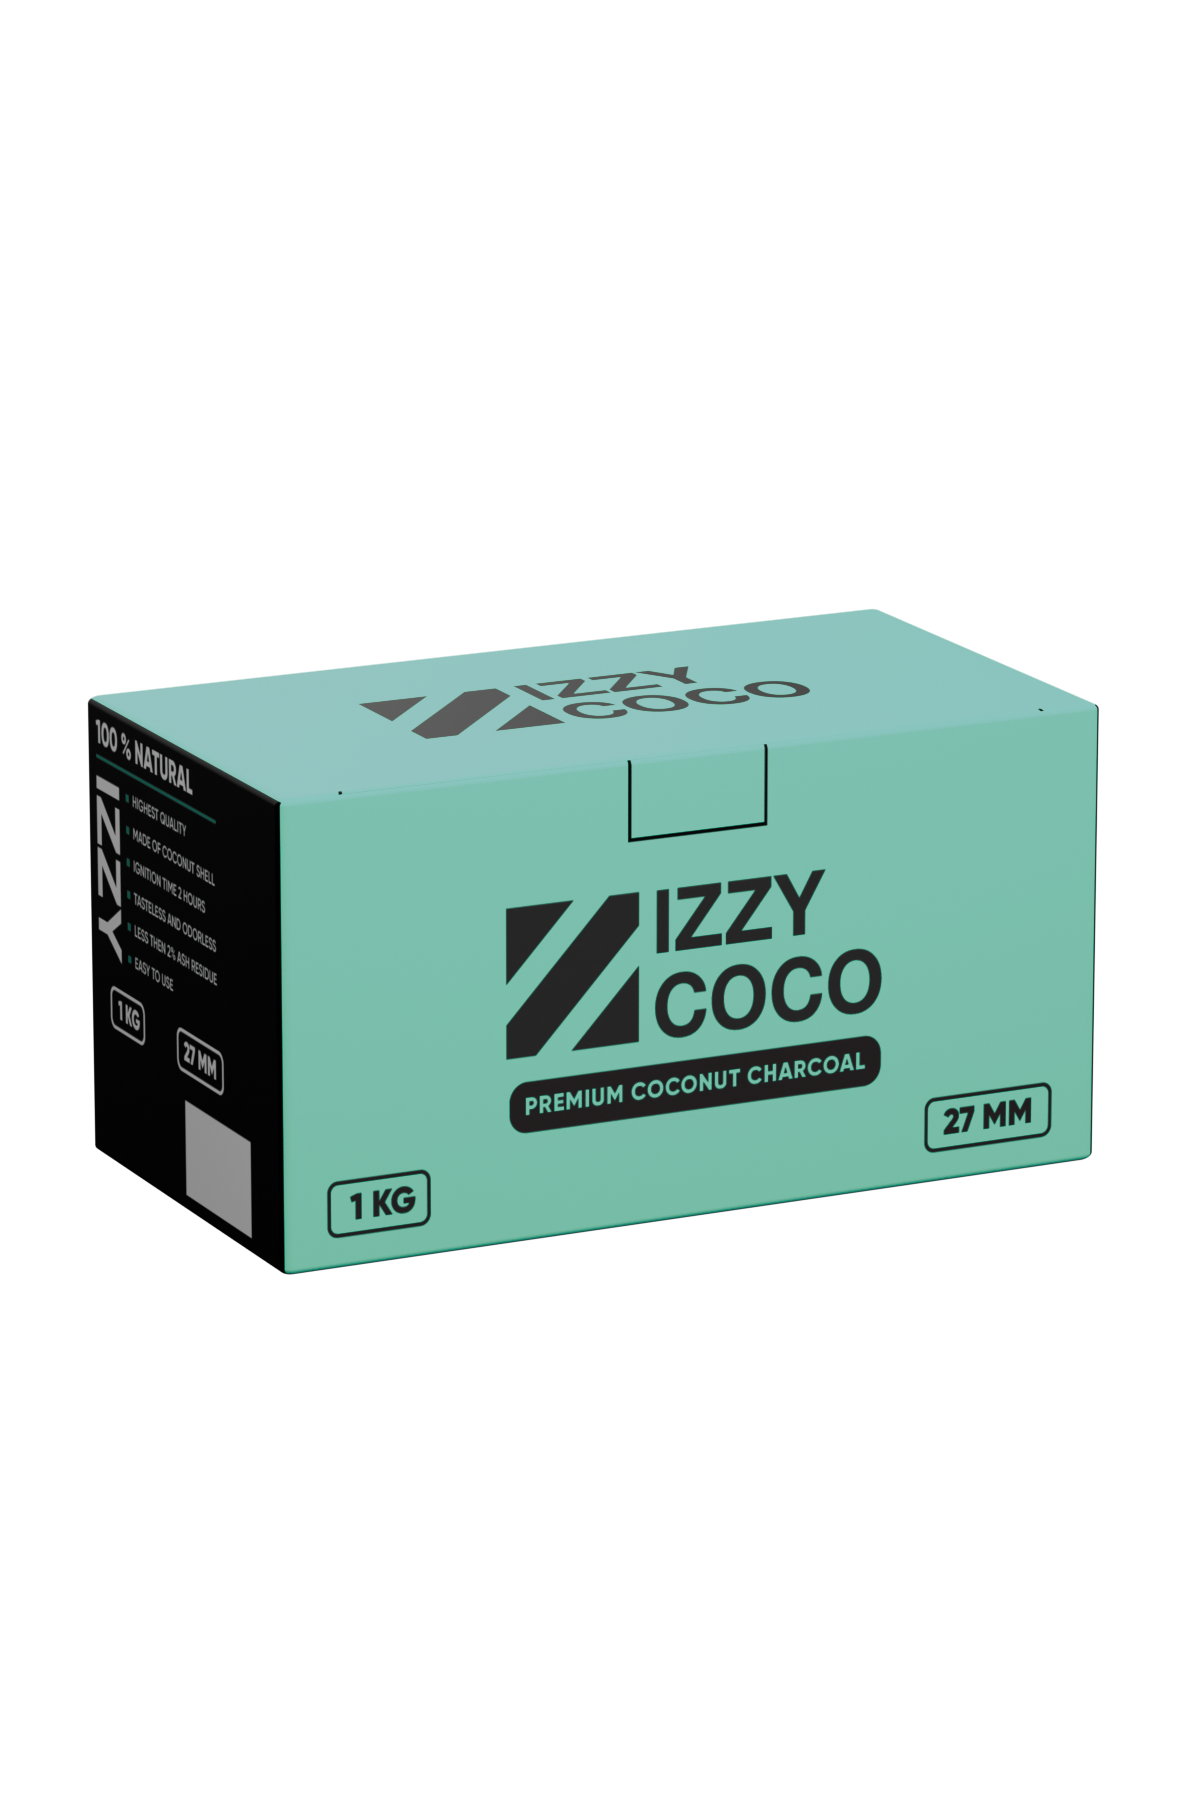 Charcoal - Izzy Coco 27mm 1kg